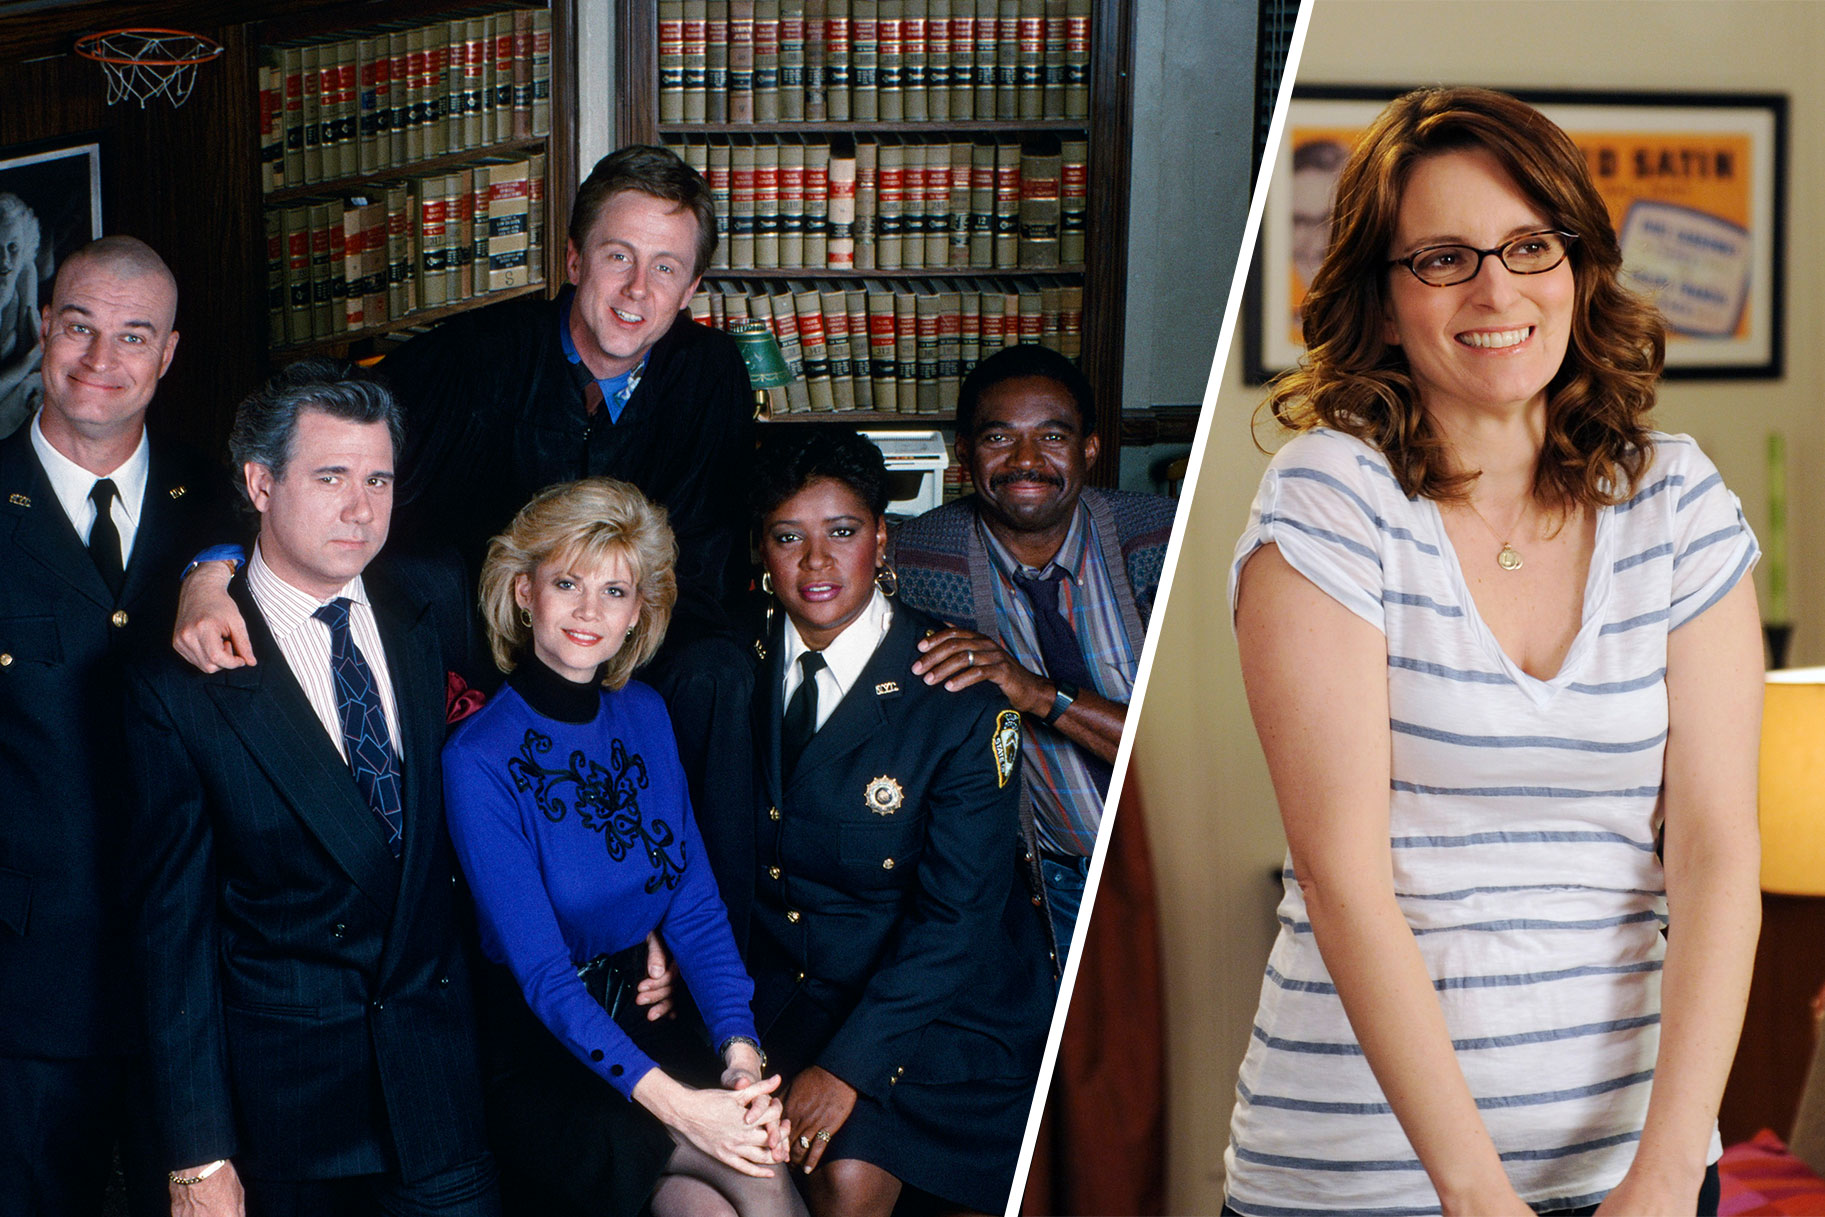 Split image of the original Night Court cast and Tina Fey in 30 Rock